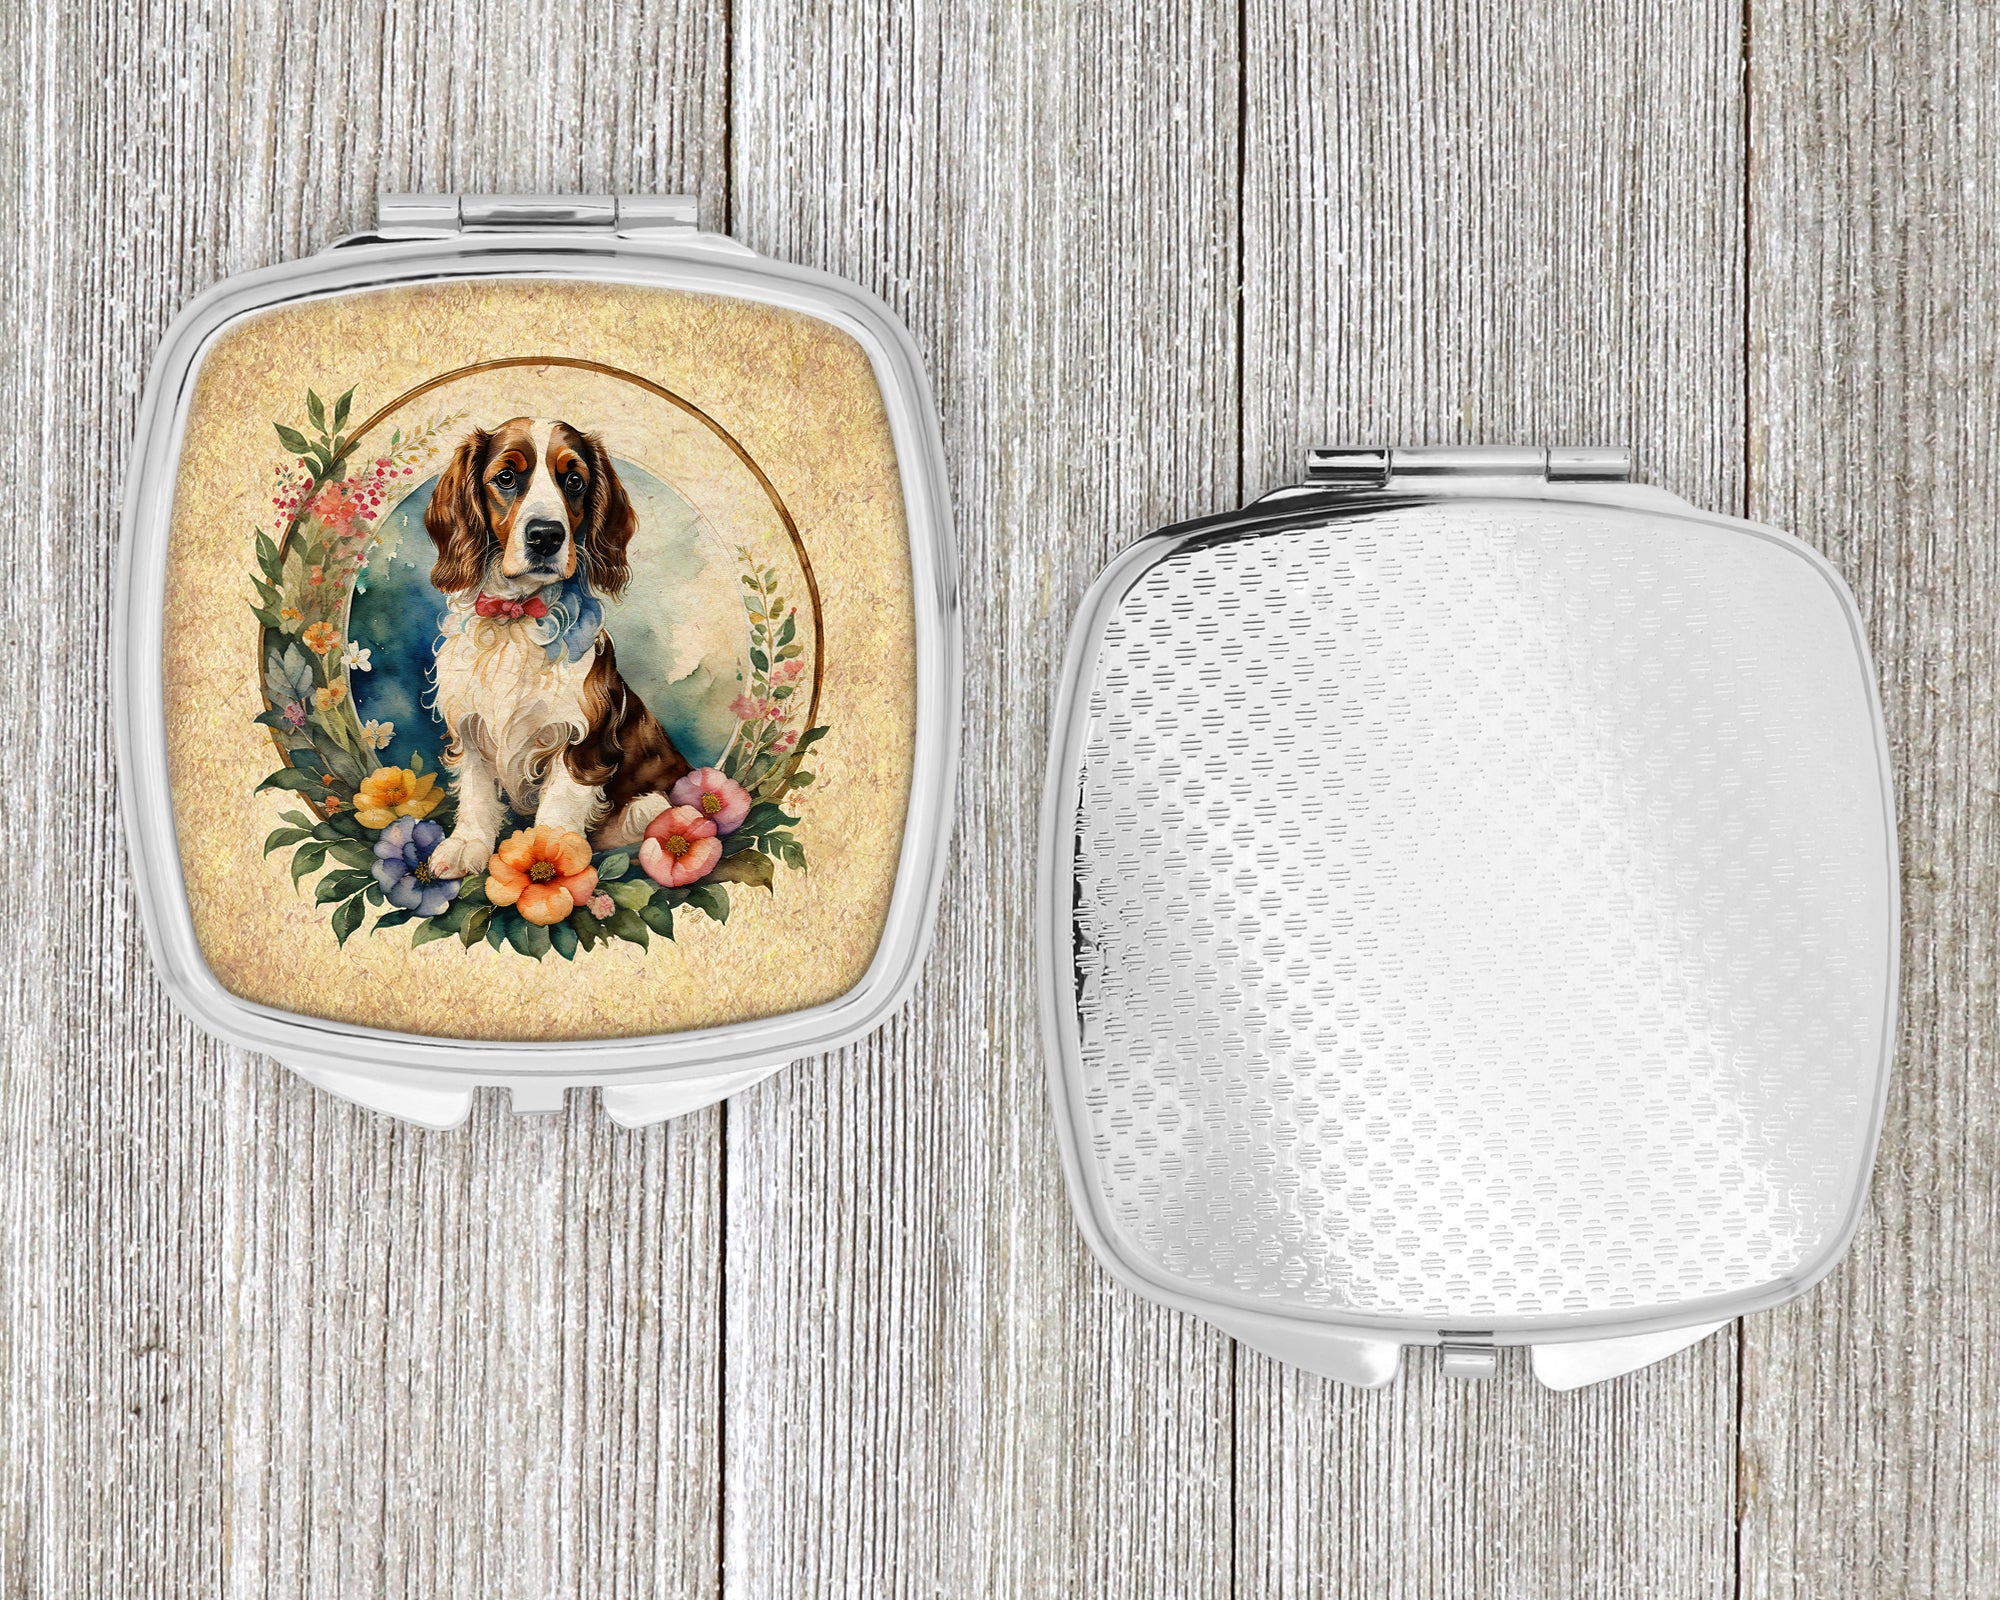 Welsh Springer Spaniel and Flowers Compact Mirror